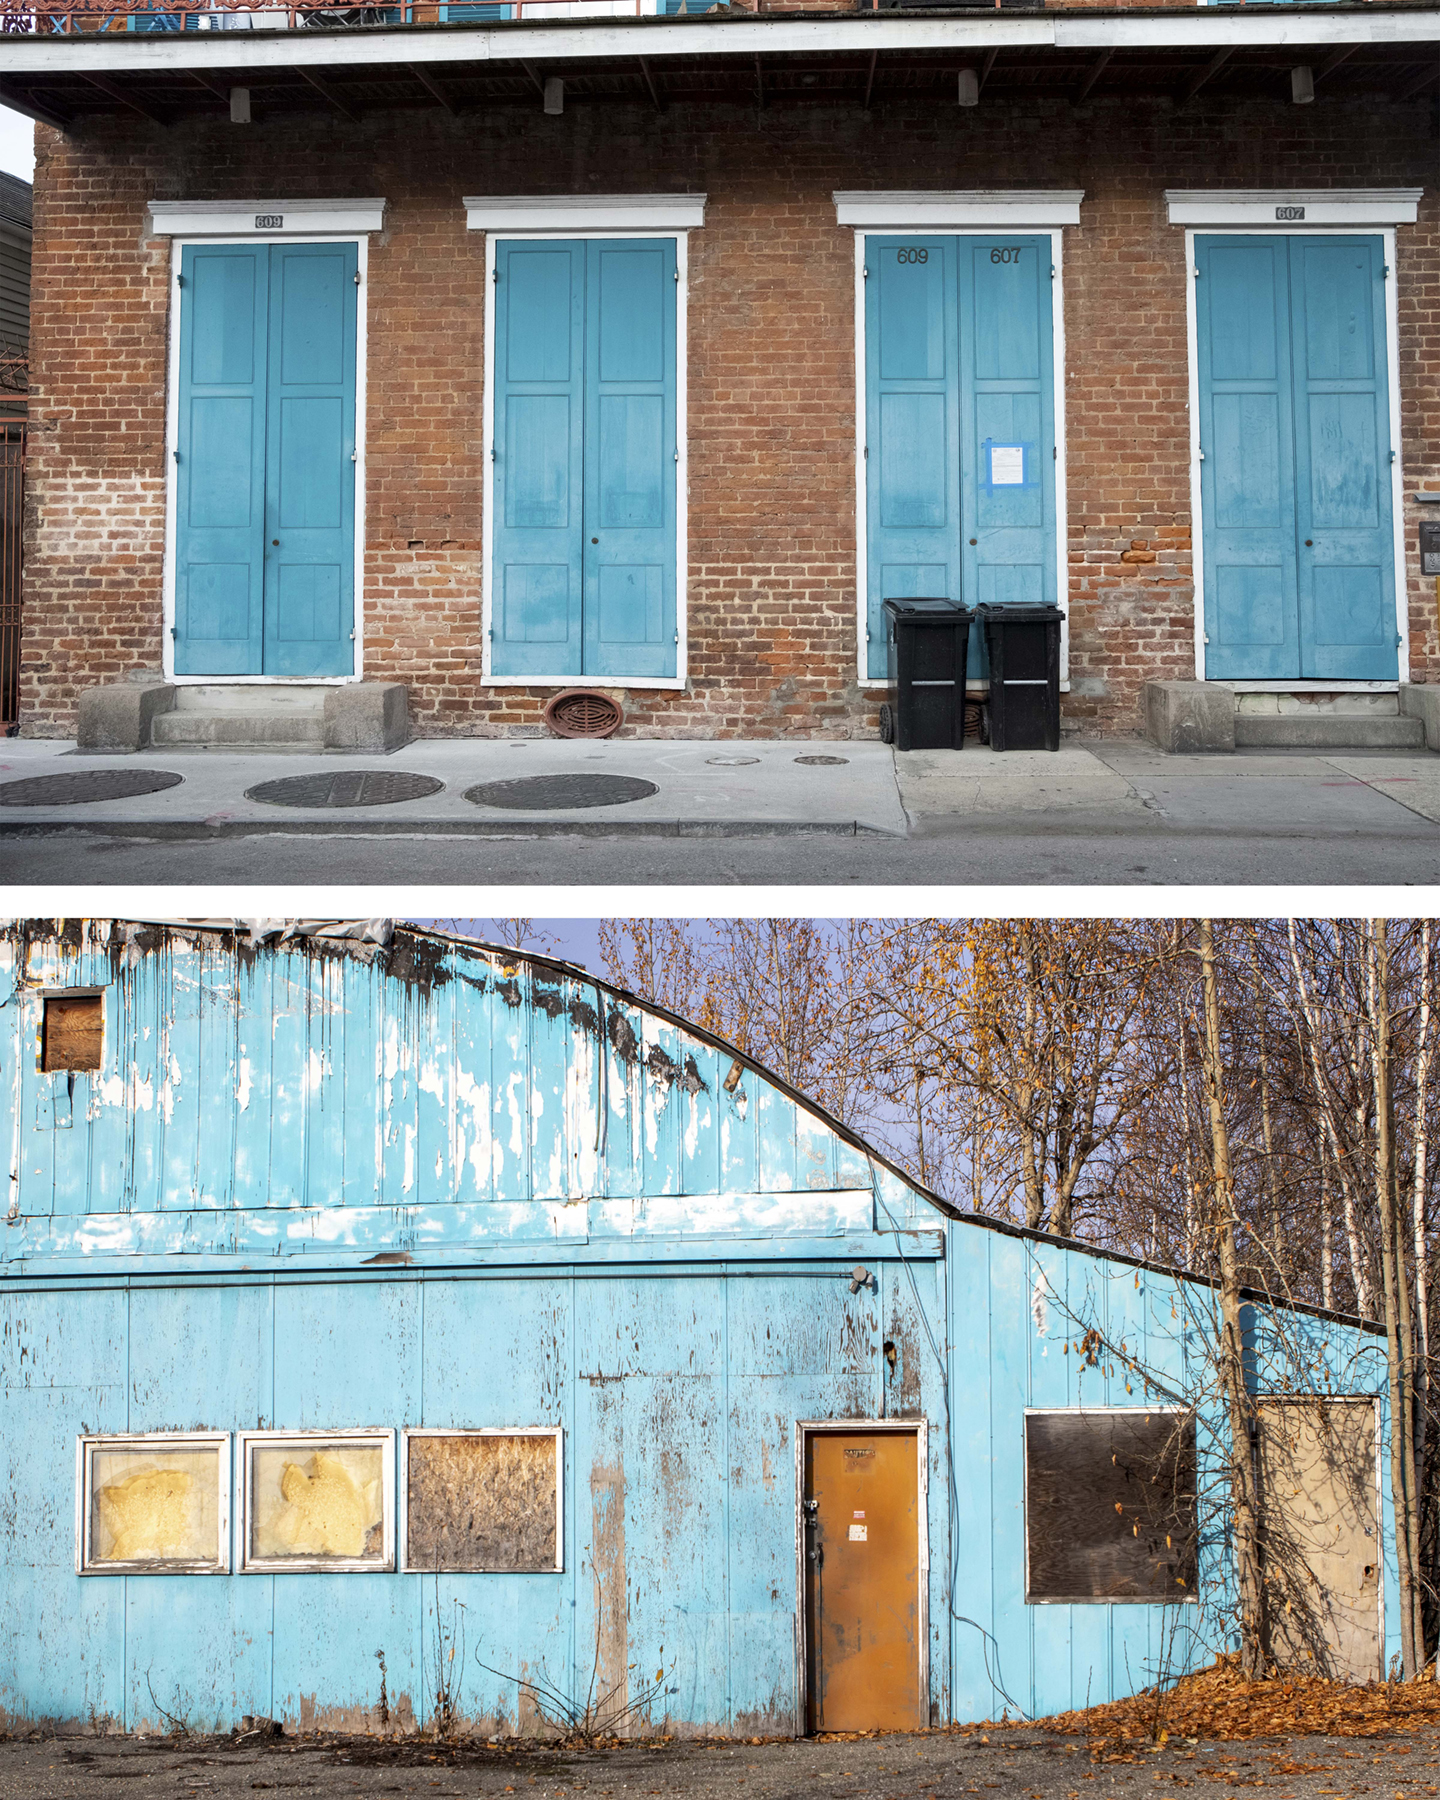 A row of blue doors on a building in Louisiana and a matching blue building in Fairbanks, courtesy of the artist